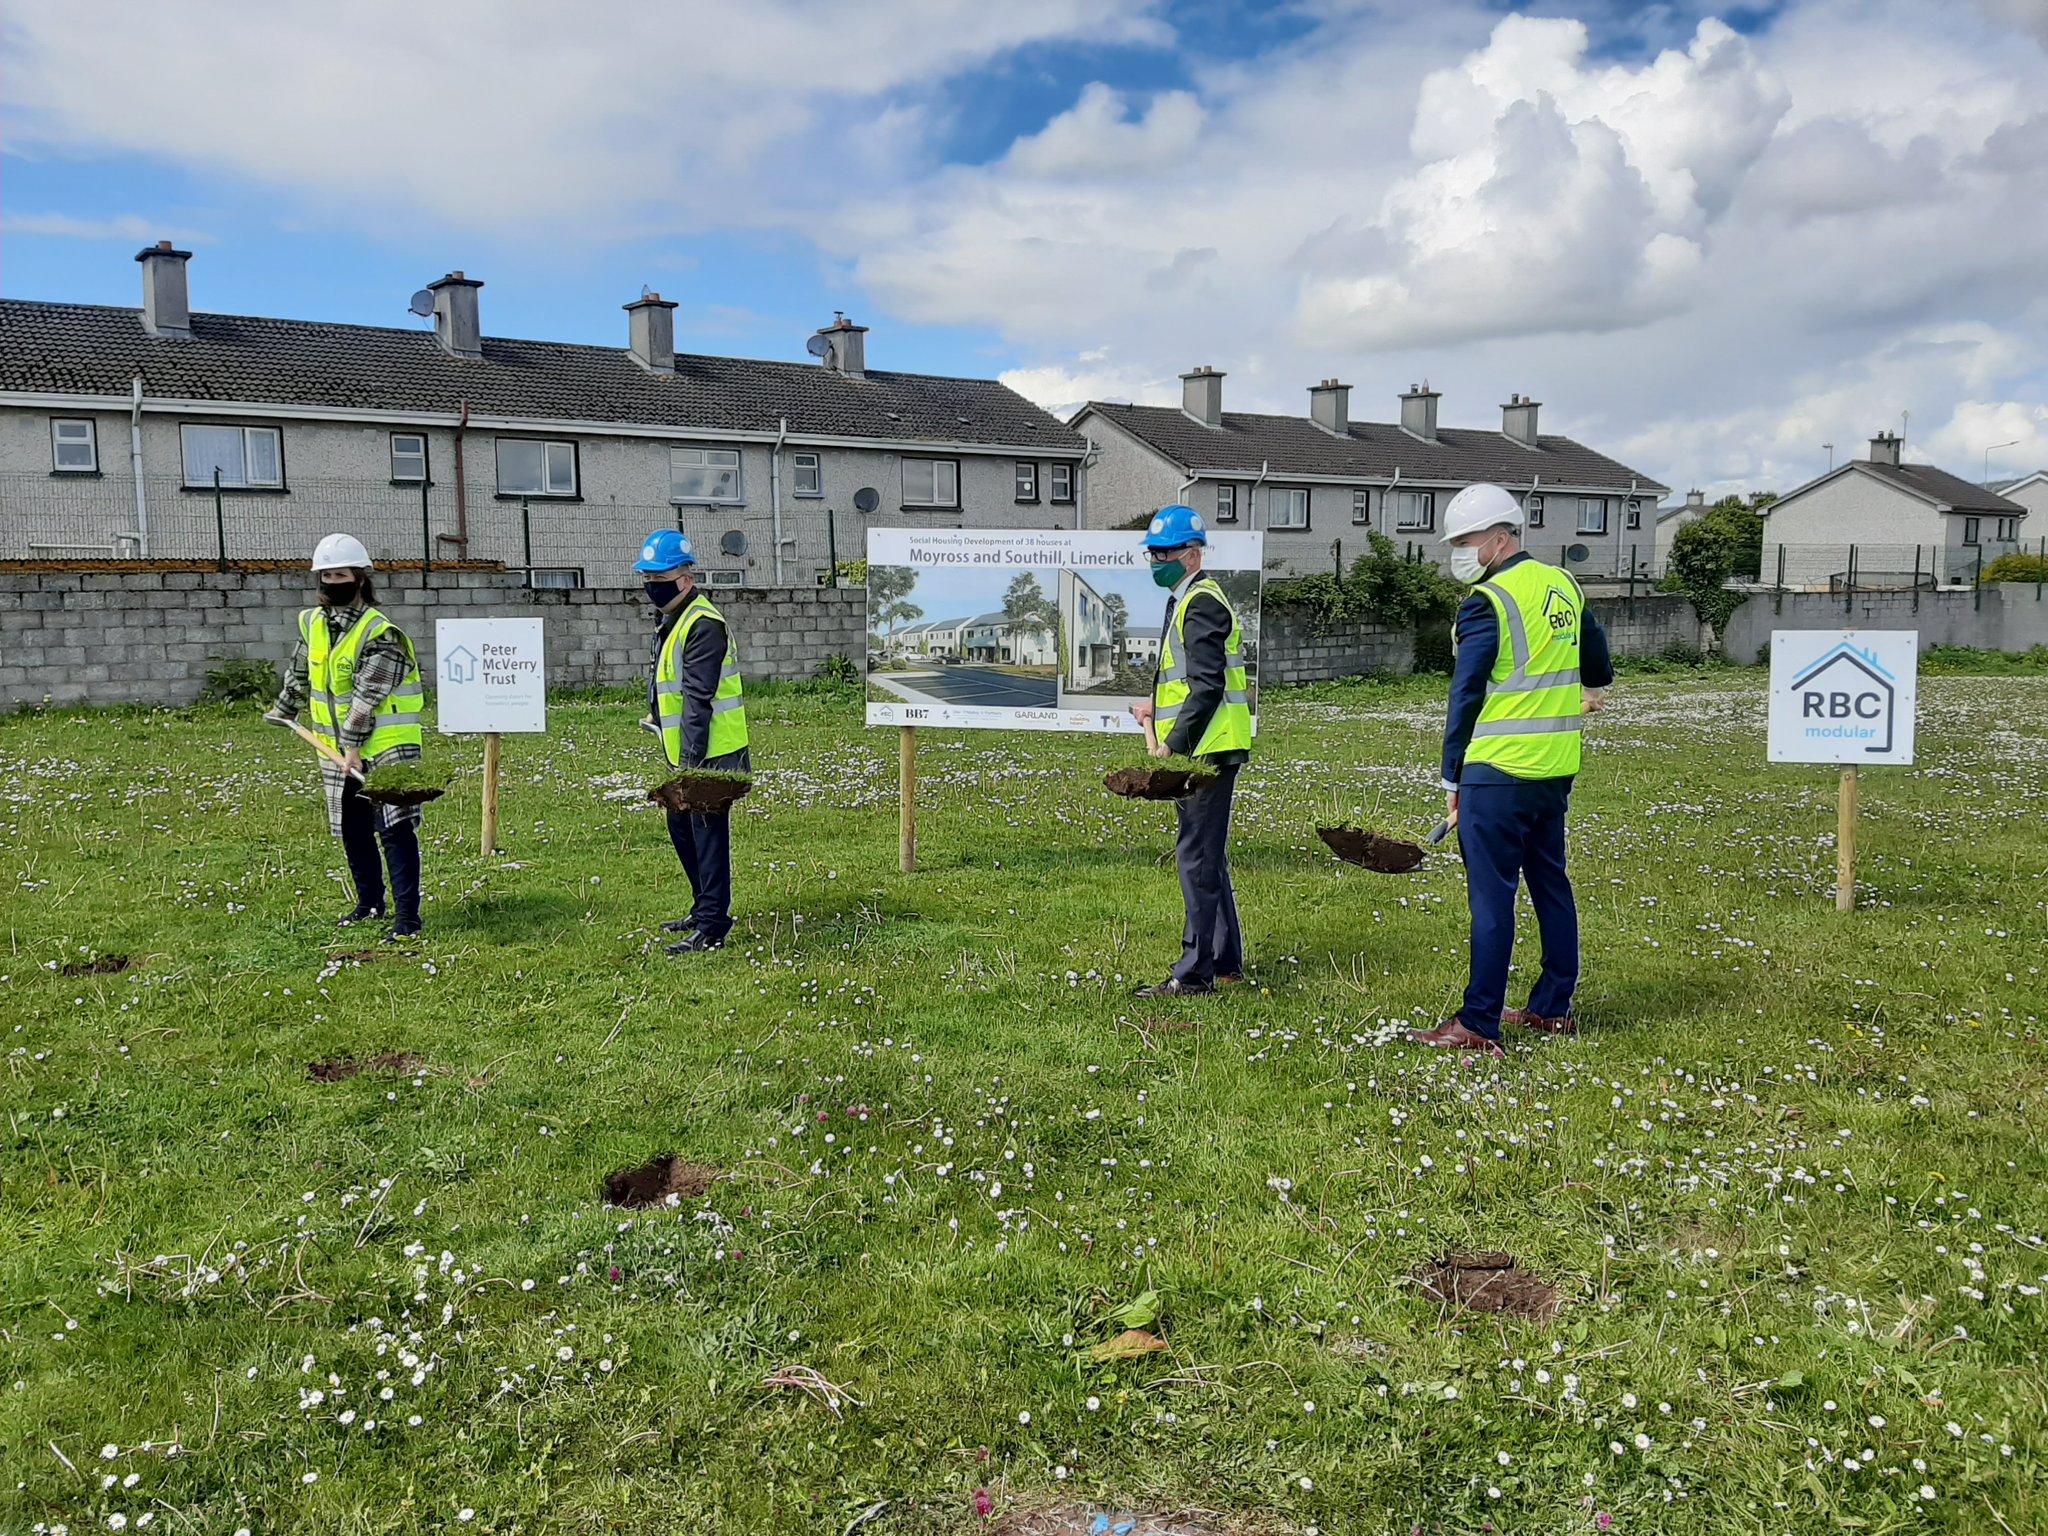 McVerry Trust collaboration - Limerick Council is working in partnership with the Peter McVerry Trust, on the project which is funded by the Department of Housing, Local Government and Heritage under Rebuilding Ireland.